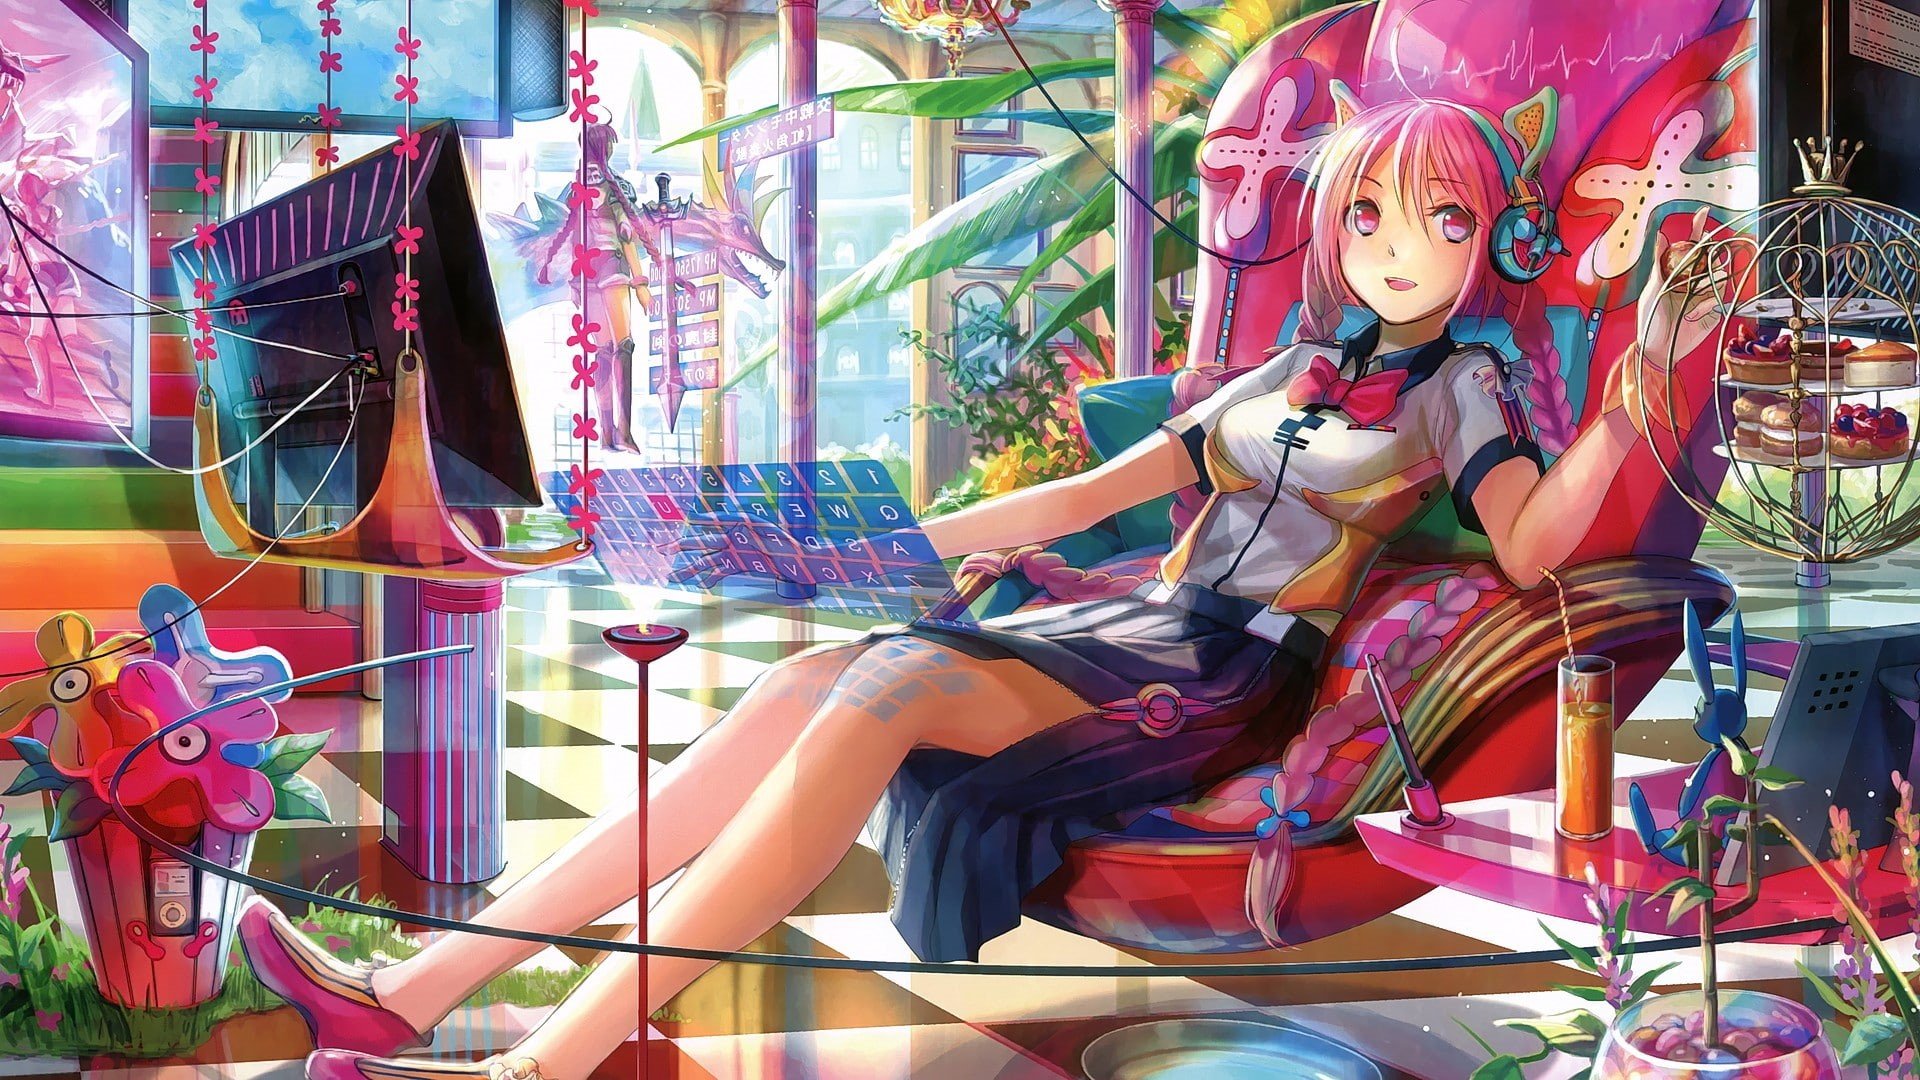 Wallpaper / looking away, smiling, carousel, women, headphones, one person, anime girls, childhood, amusement park, technology, girls, real people, amusement park ride free download